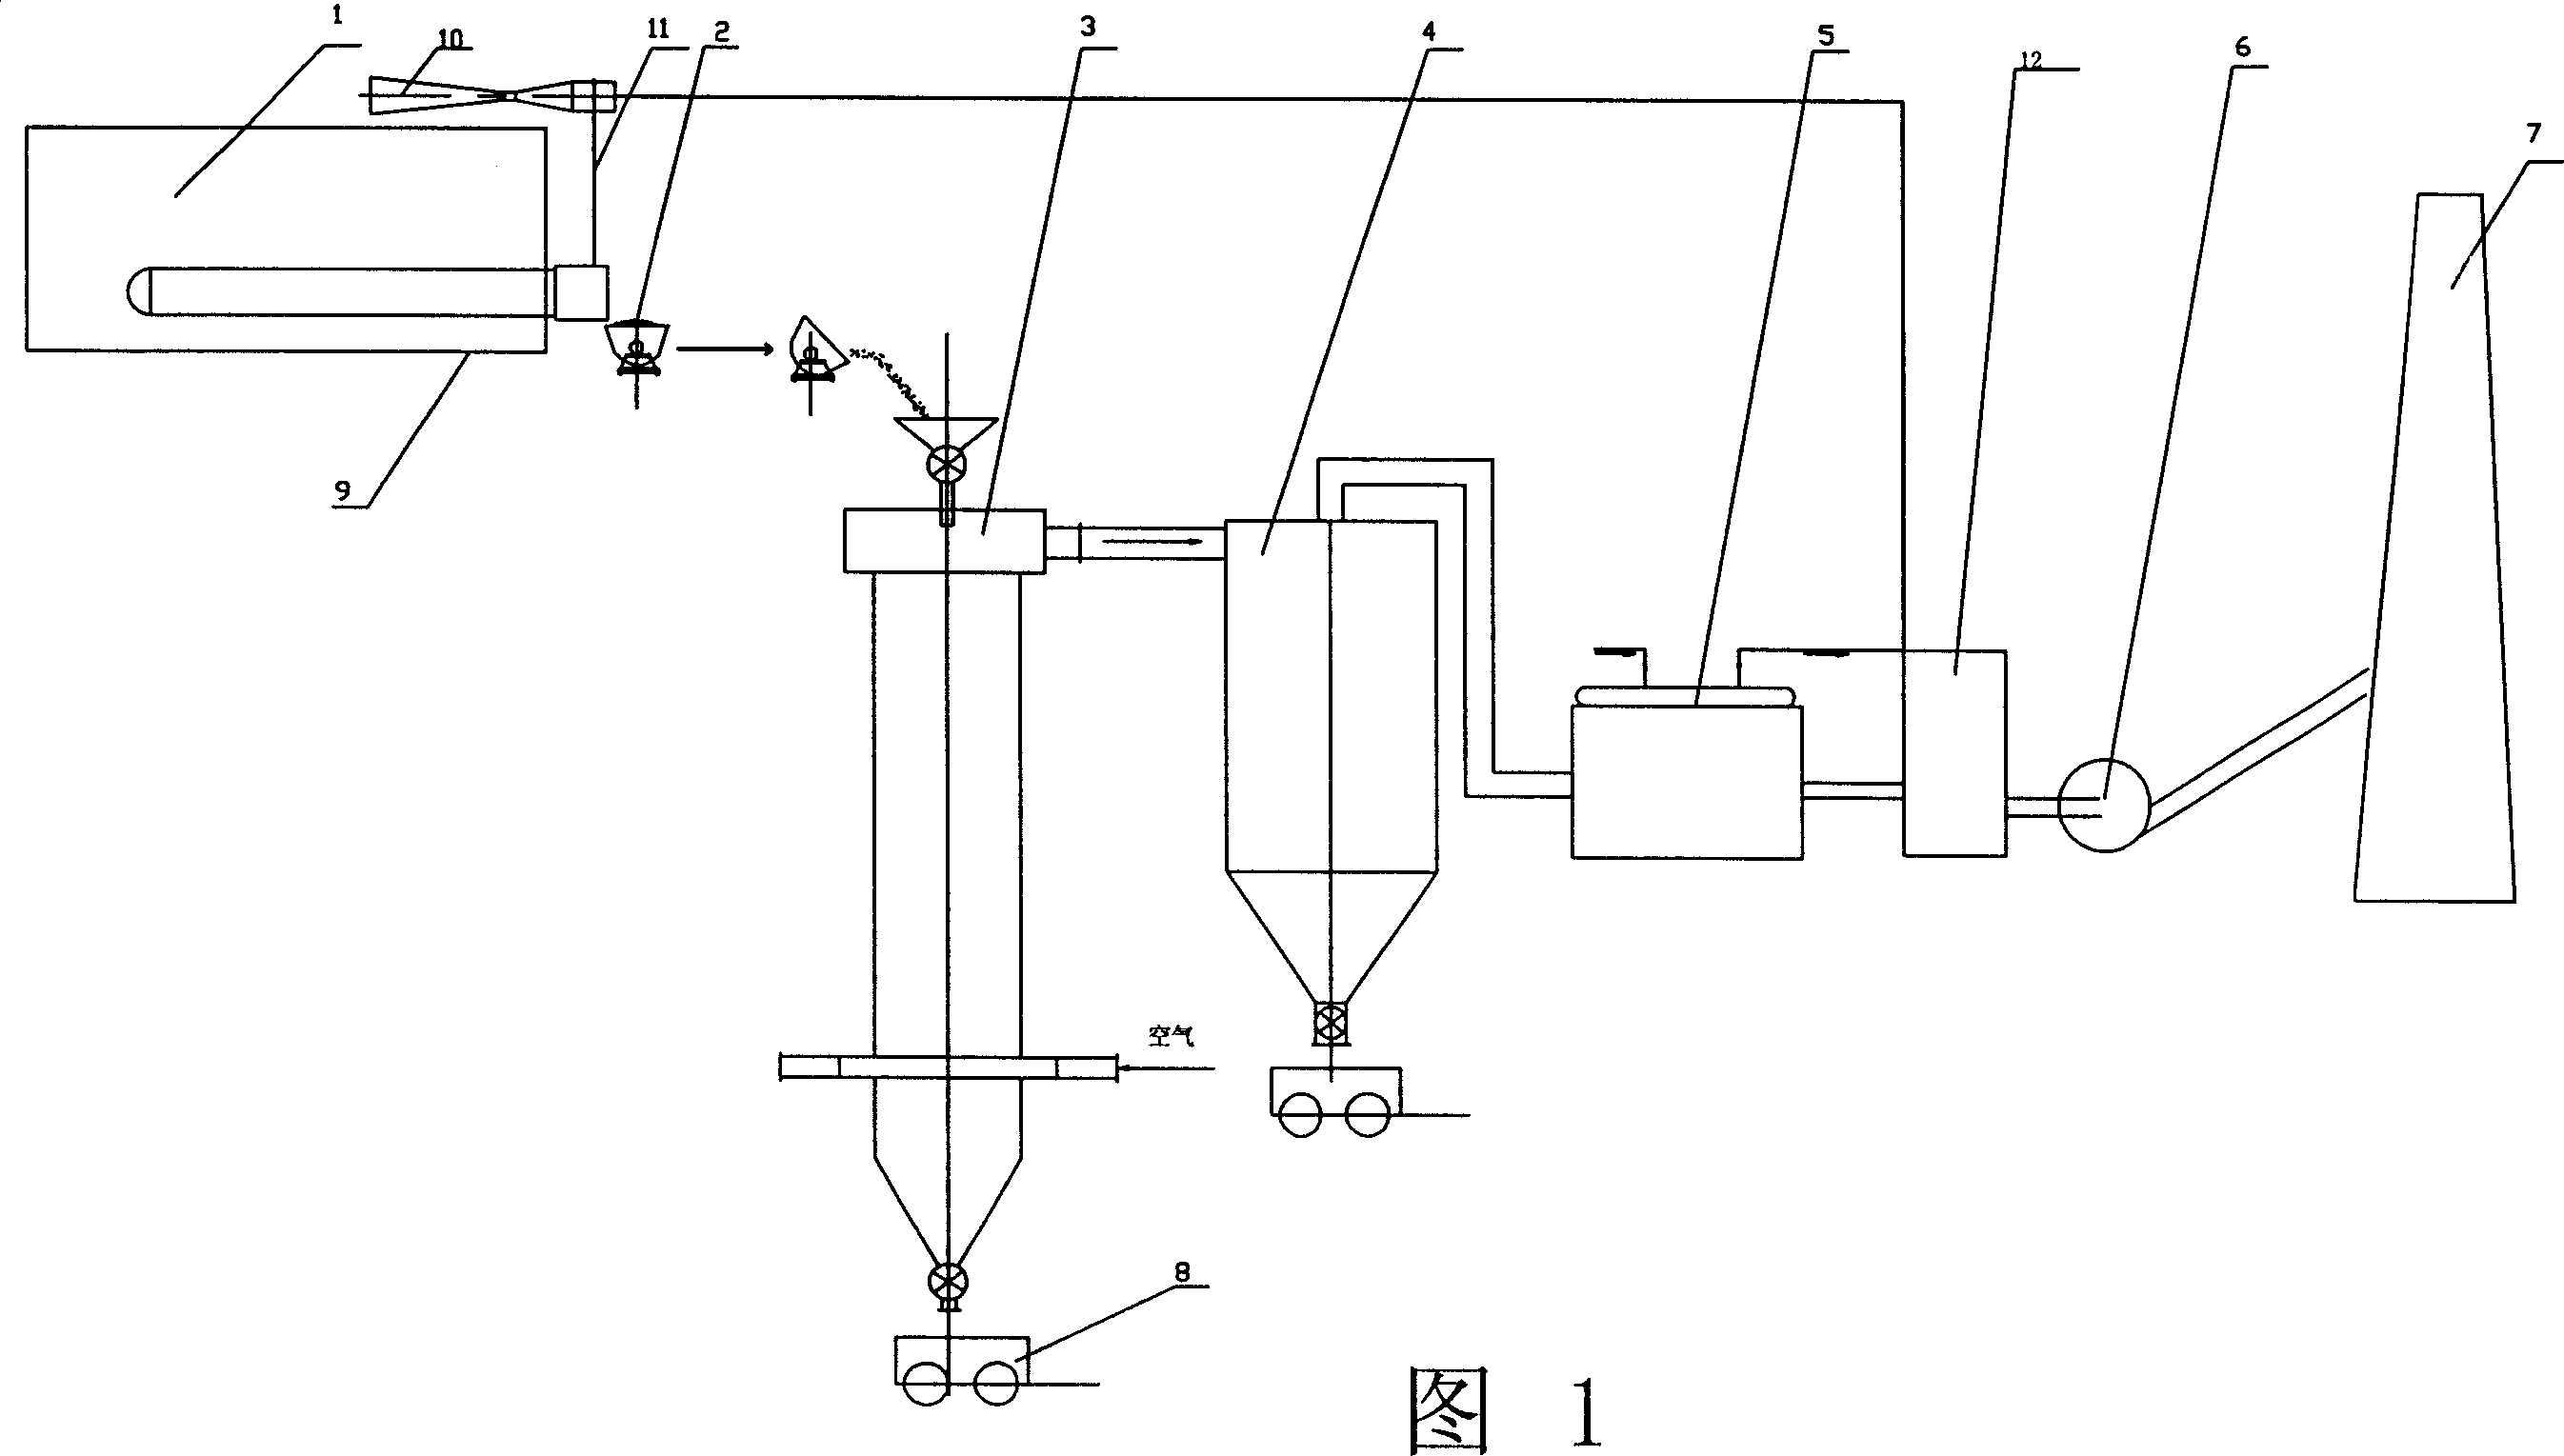 System for vacuum pumping by steam produed by reduction dregs afterheat